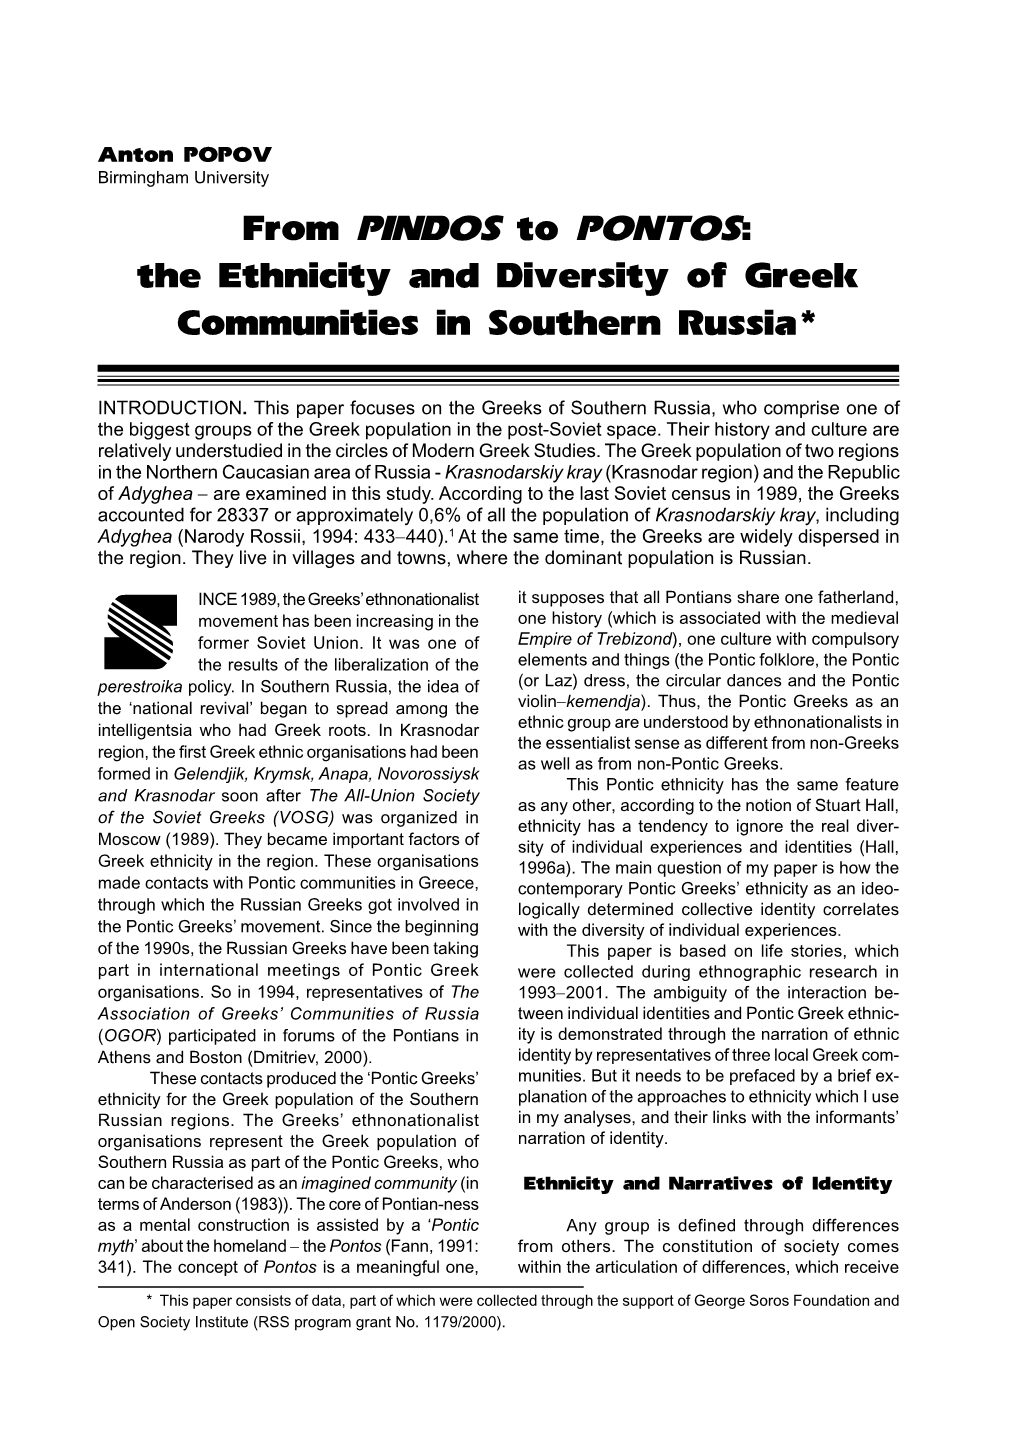 From PINDOS to PONTOS: the Ethnicity and Diversity of Greek Communities in Southern Russia*